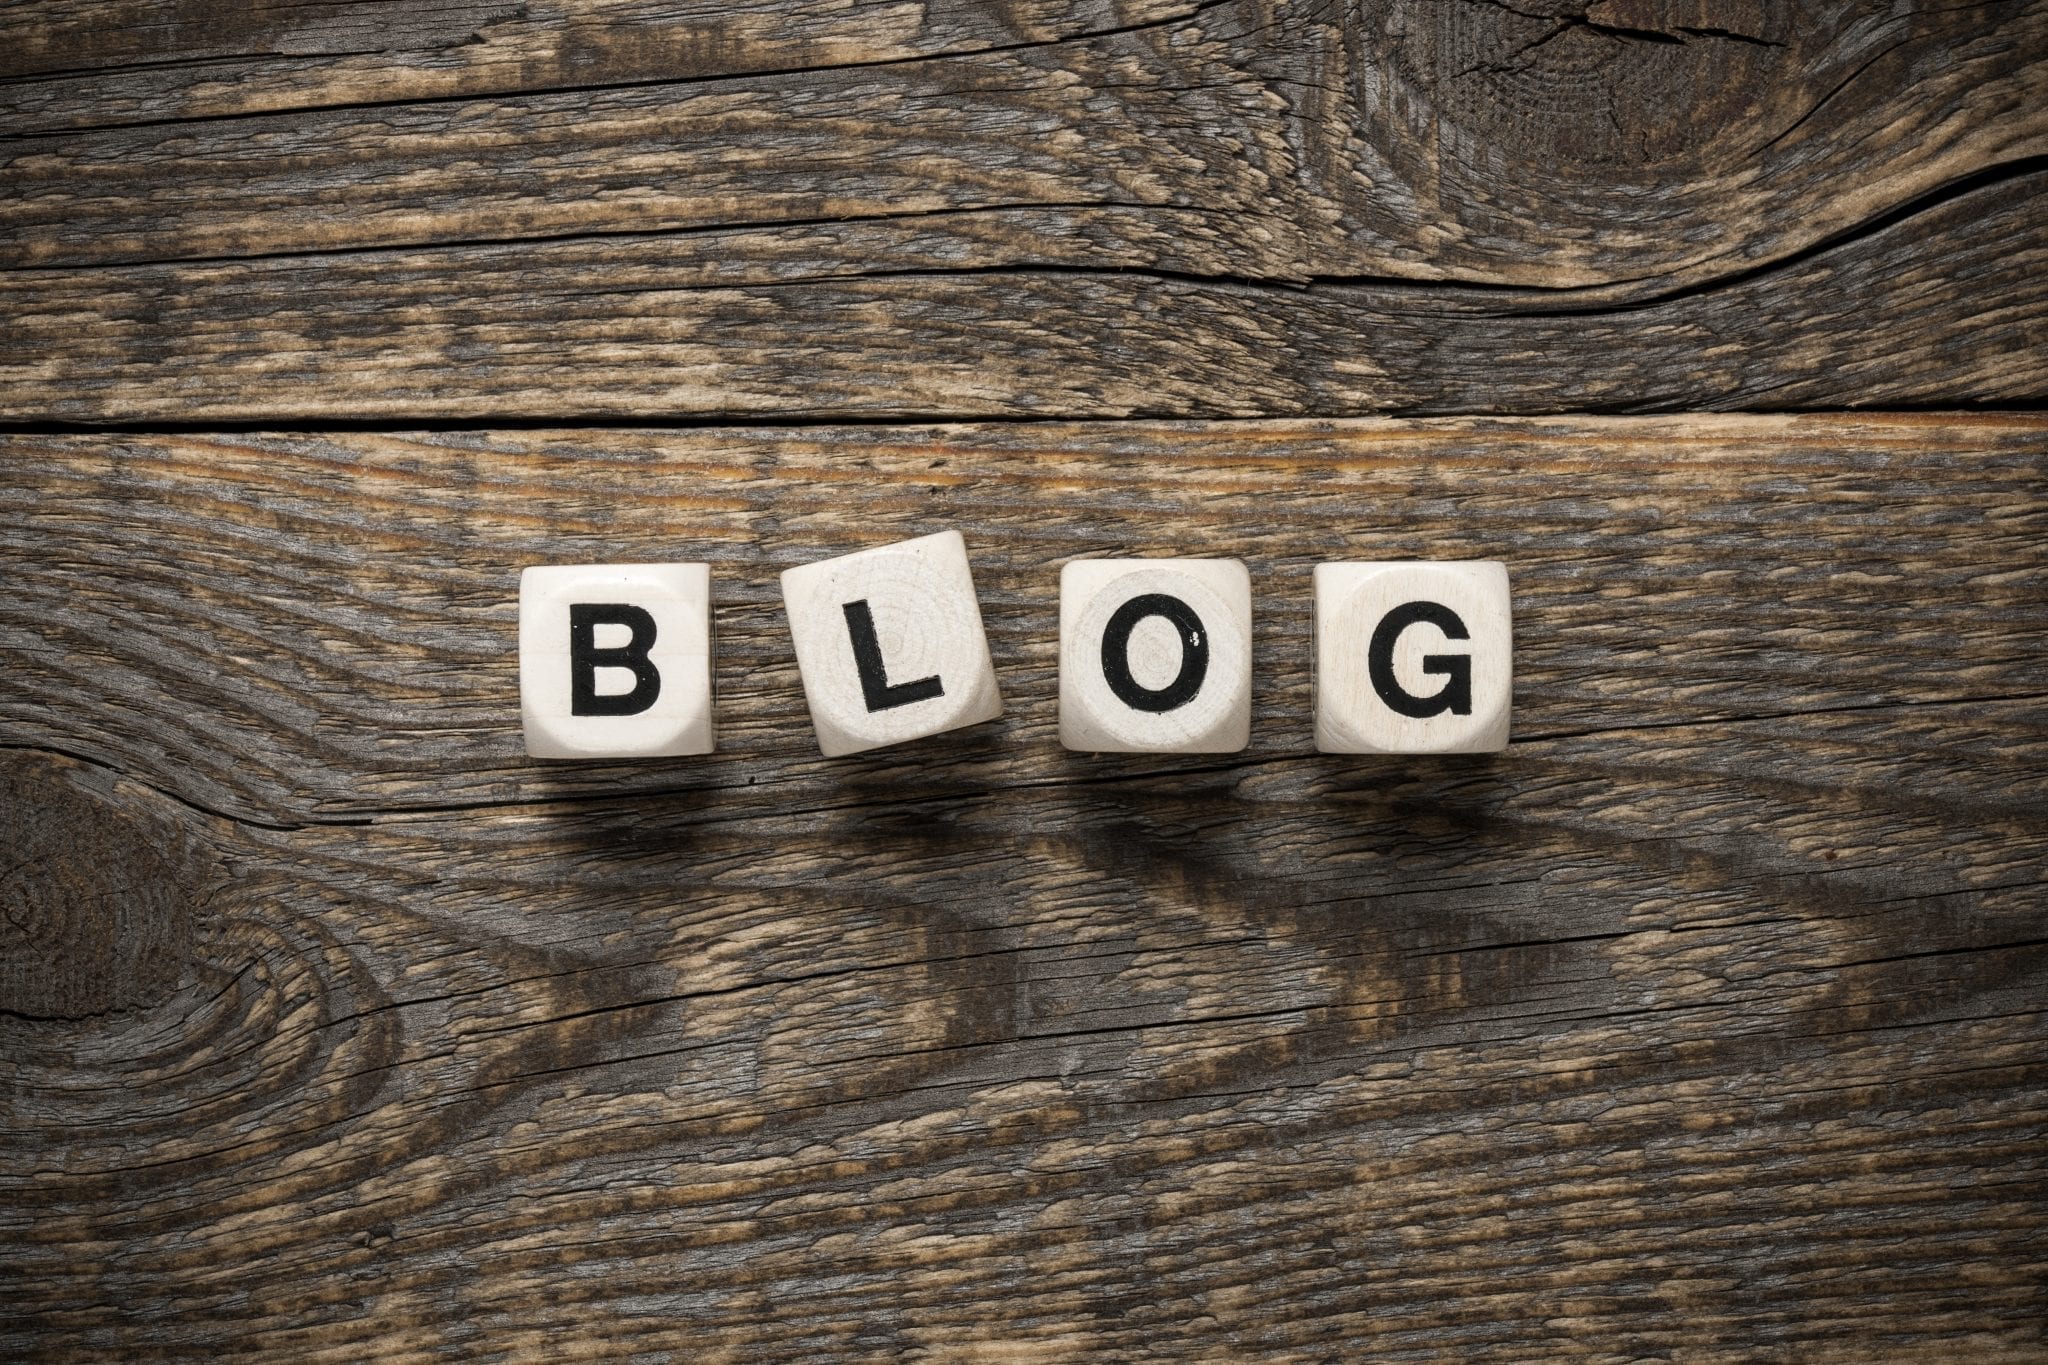 What is the purpose of blogging?